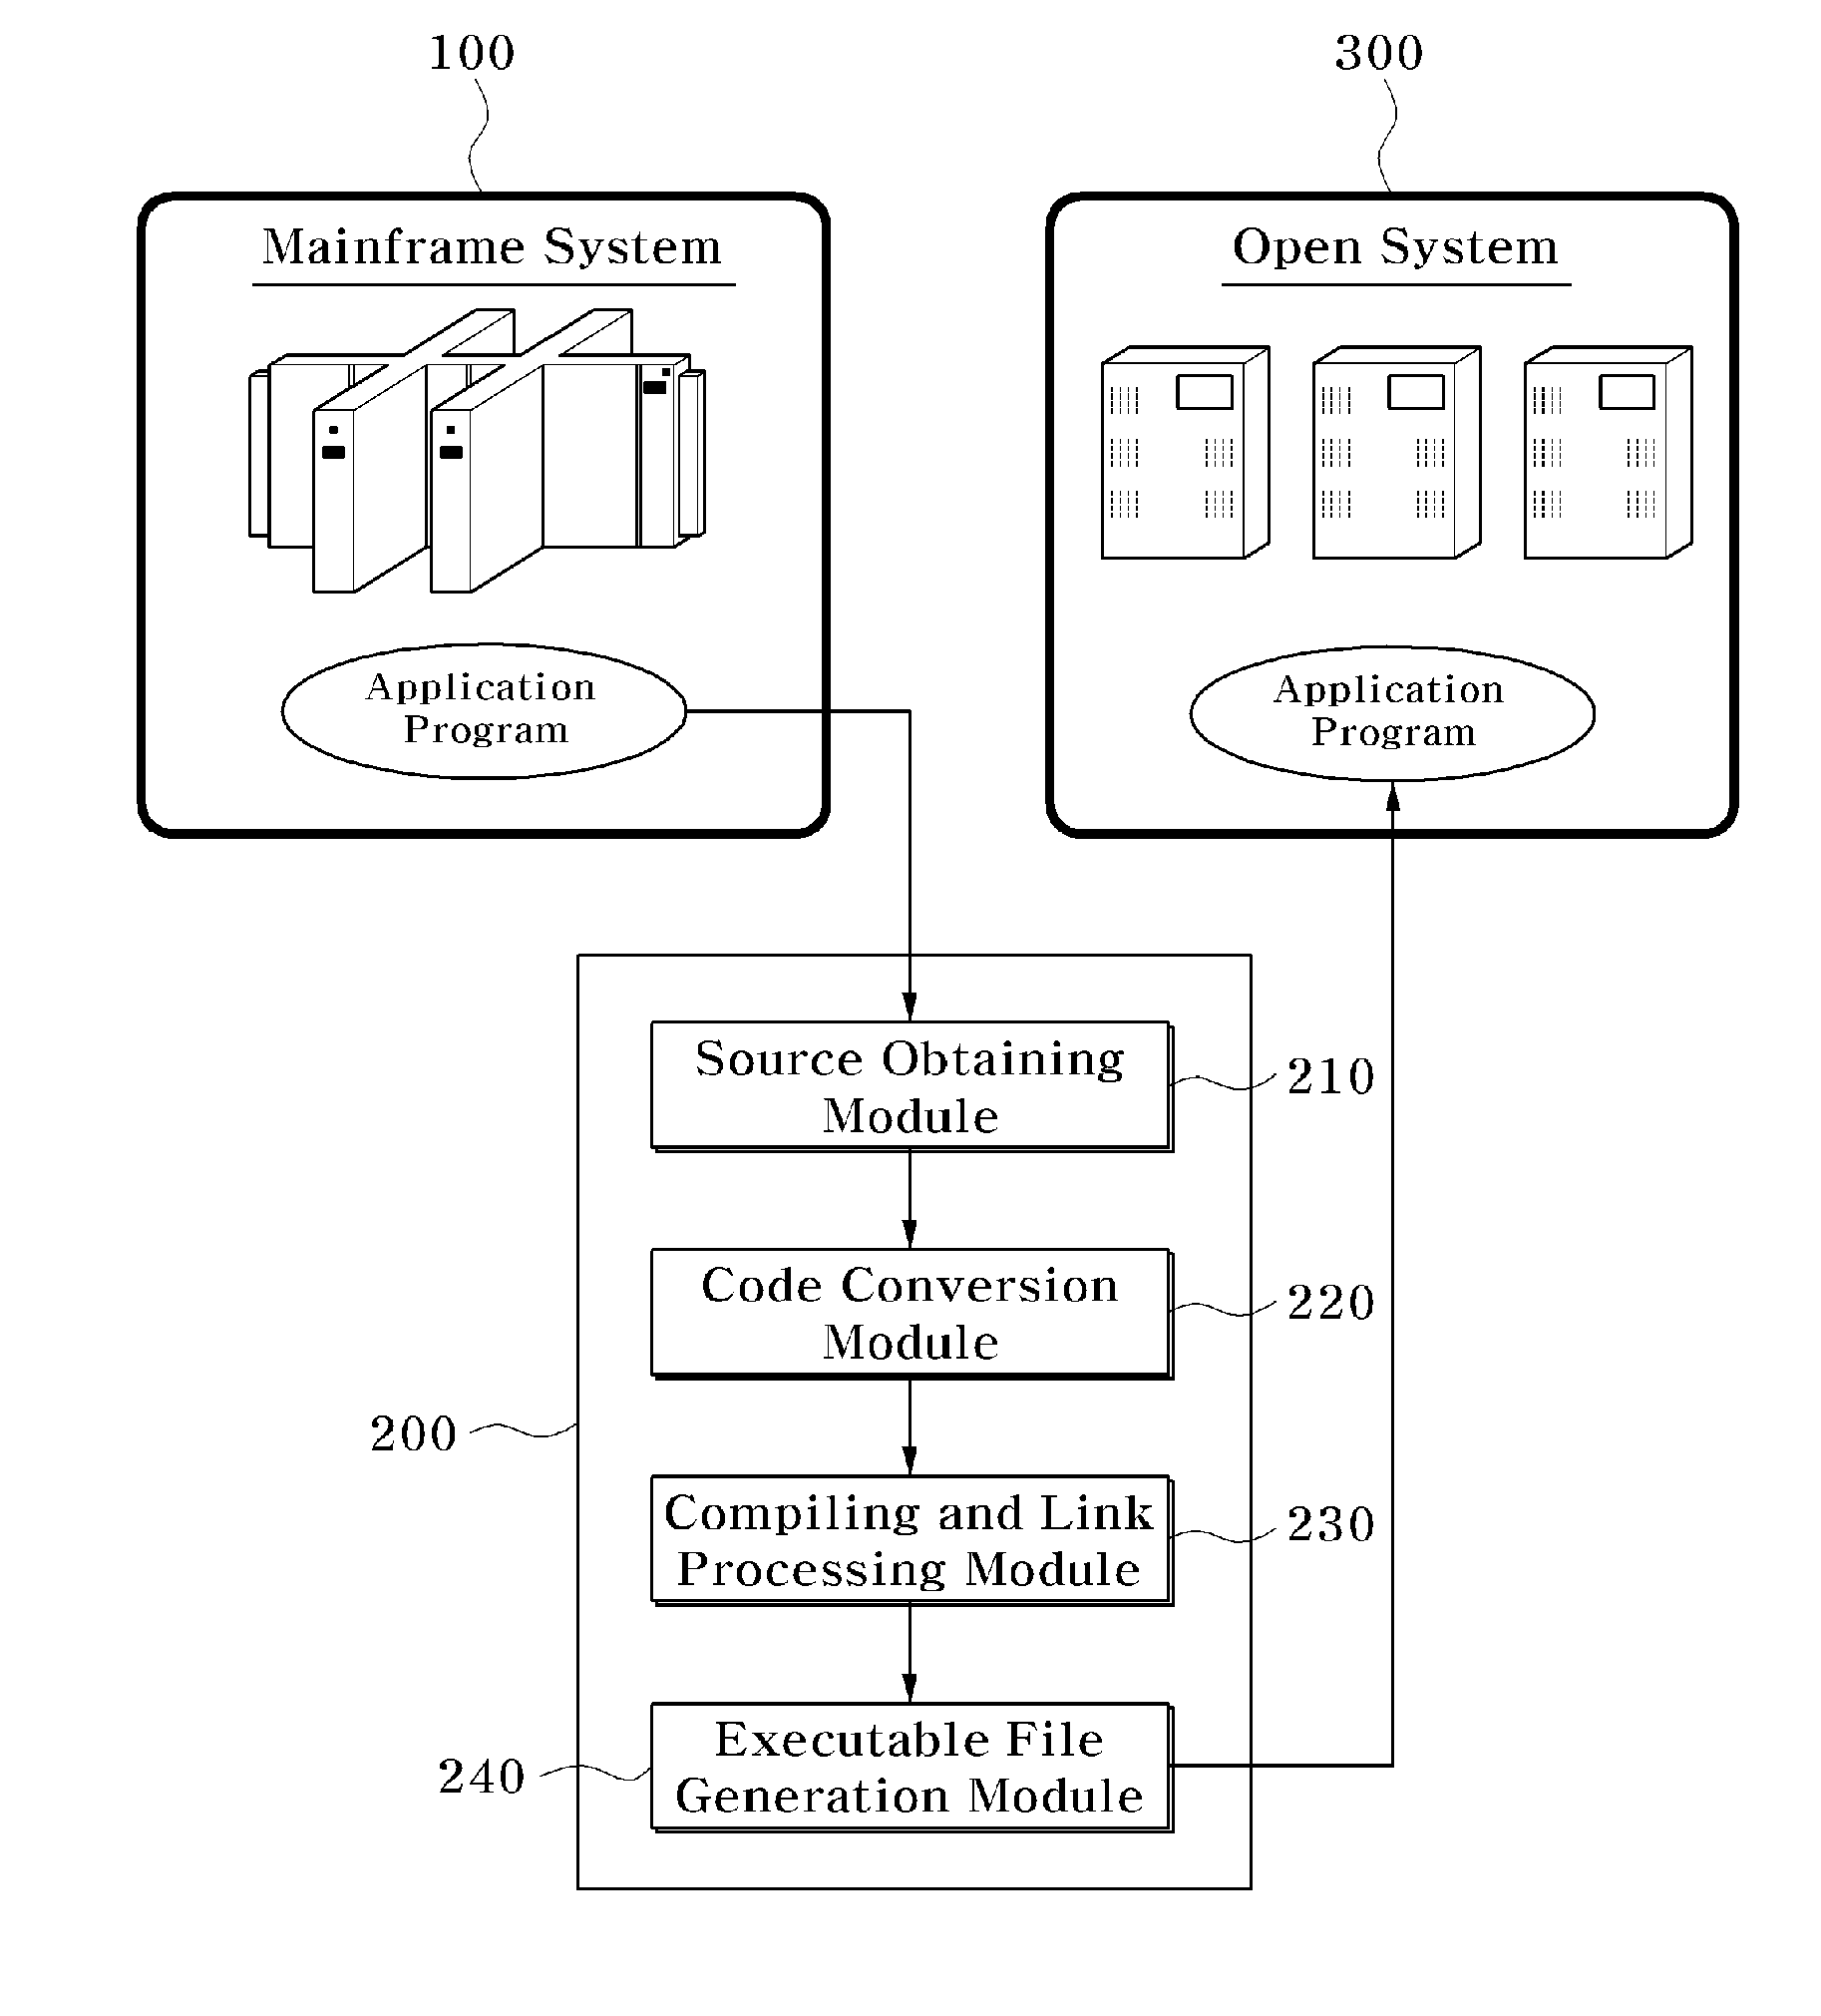 Migration Apparatus Which Convert Application Program of Mainframe System into Application Program of Open System and Method for Thereof